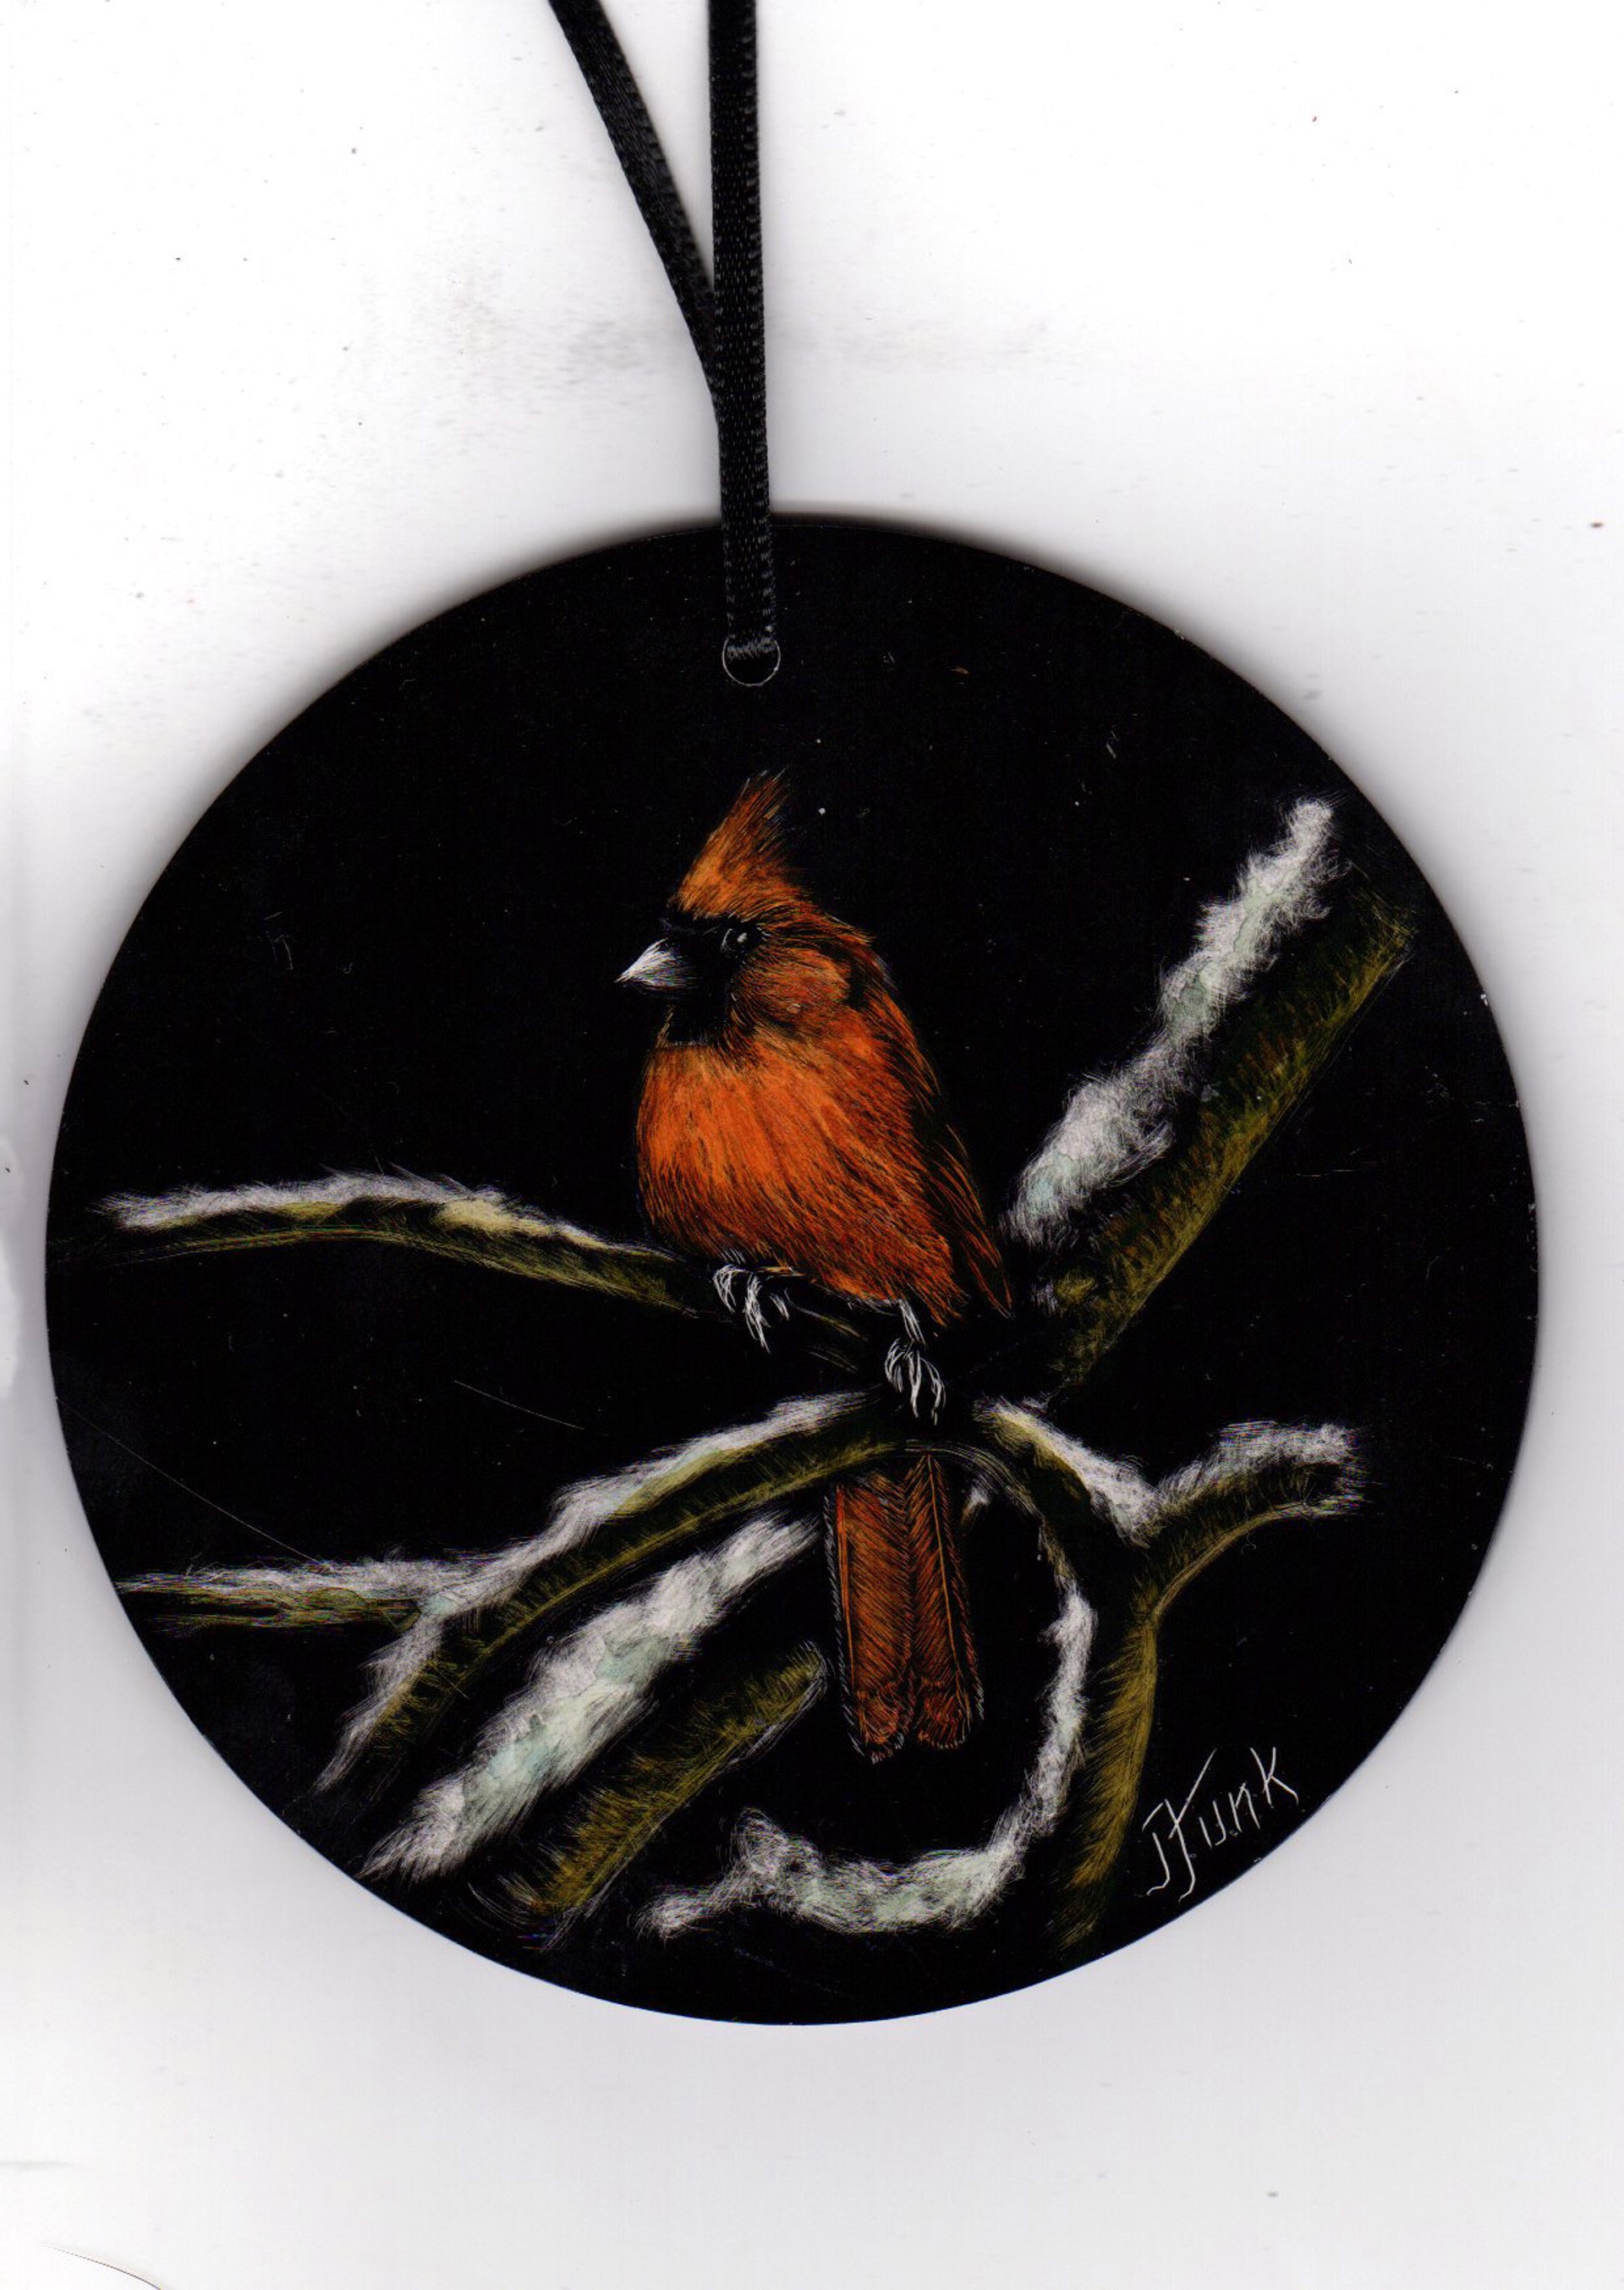 Fire - Cardinal - Ornament by Janet Funk